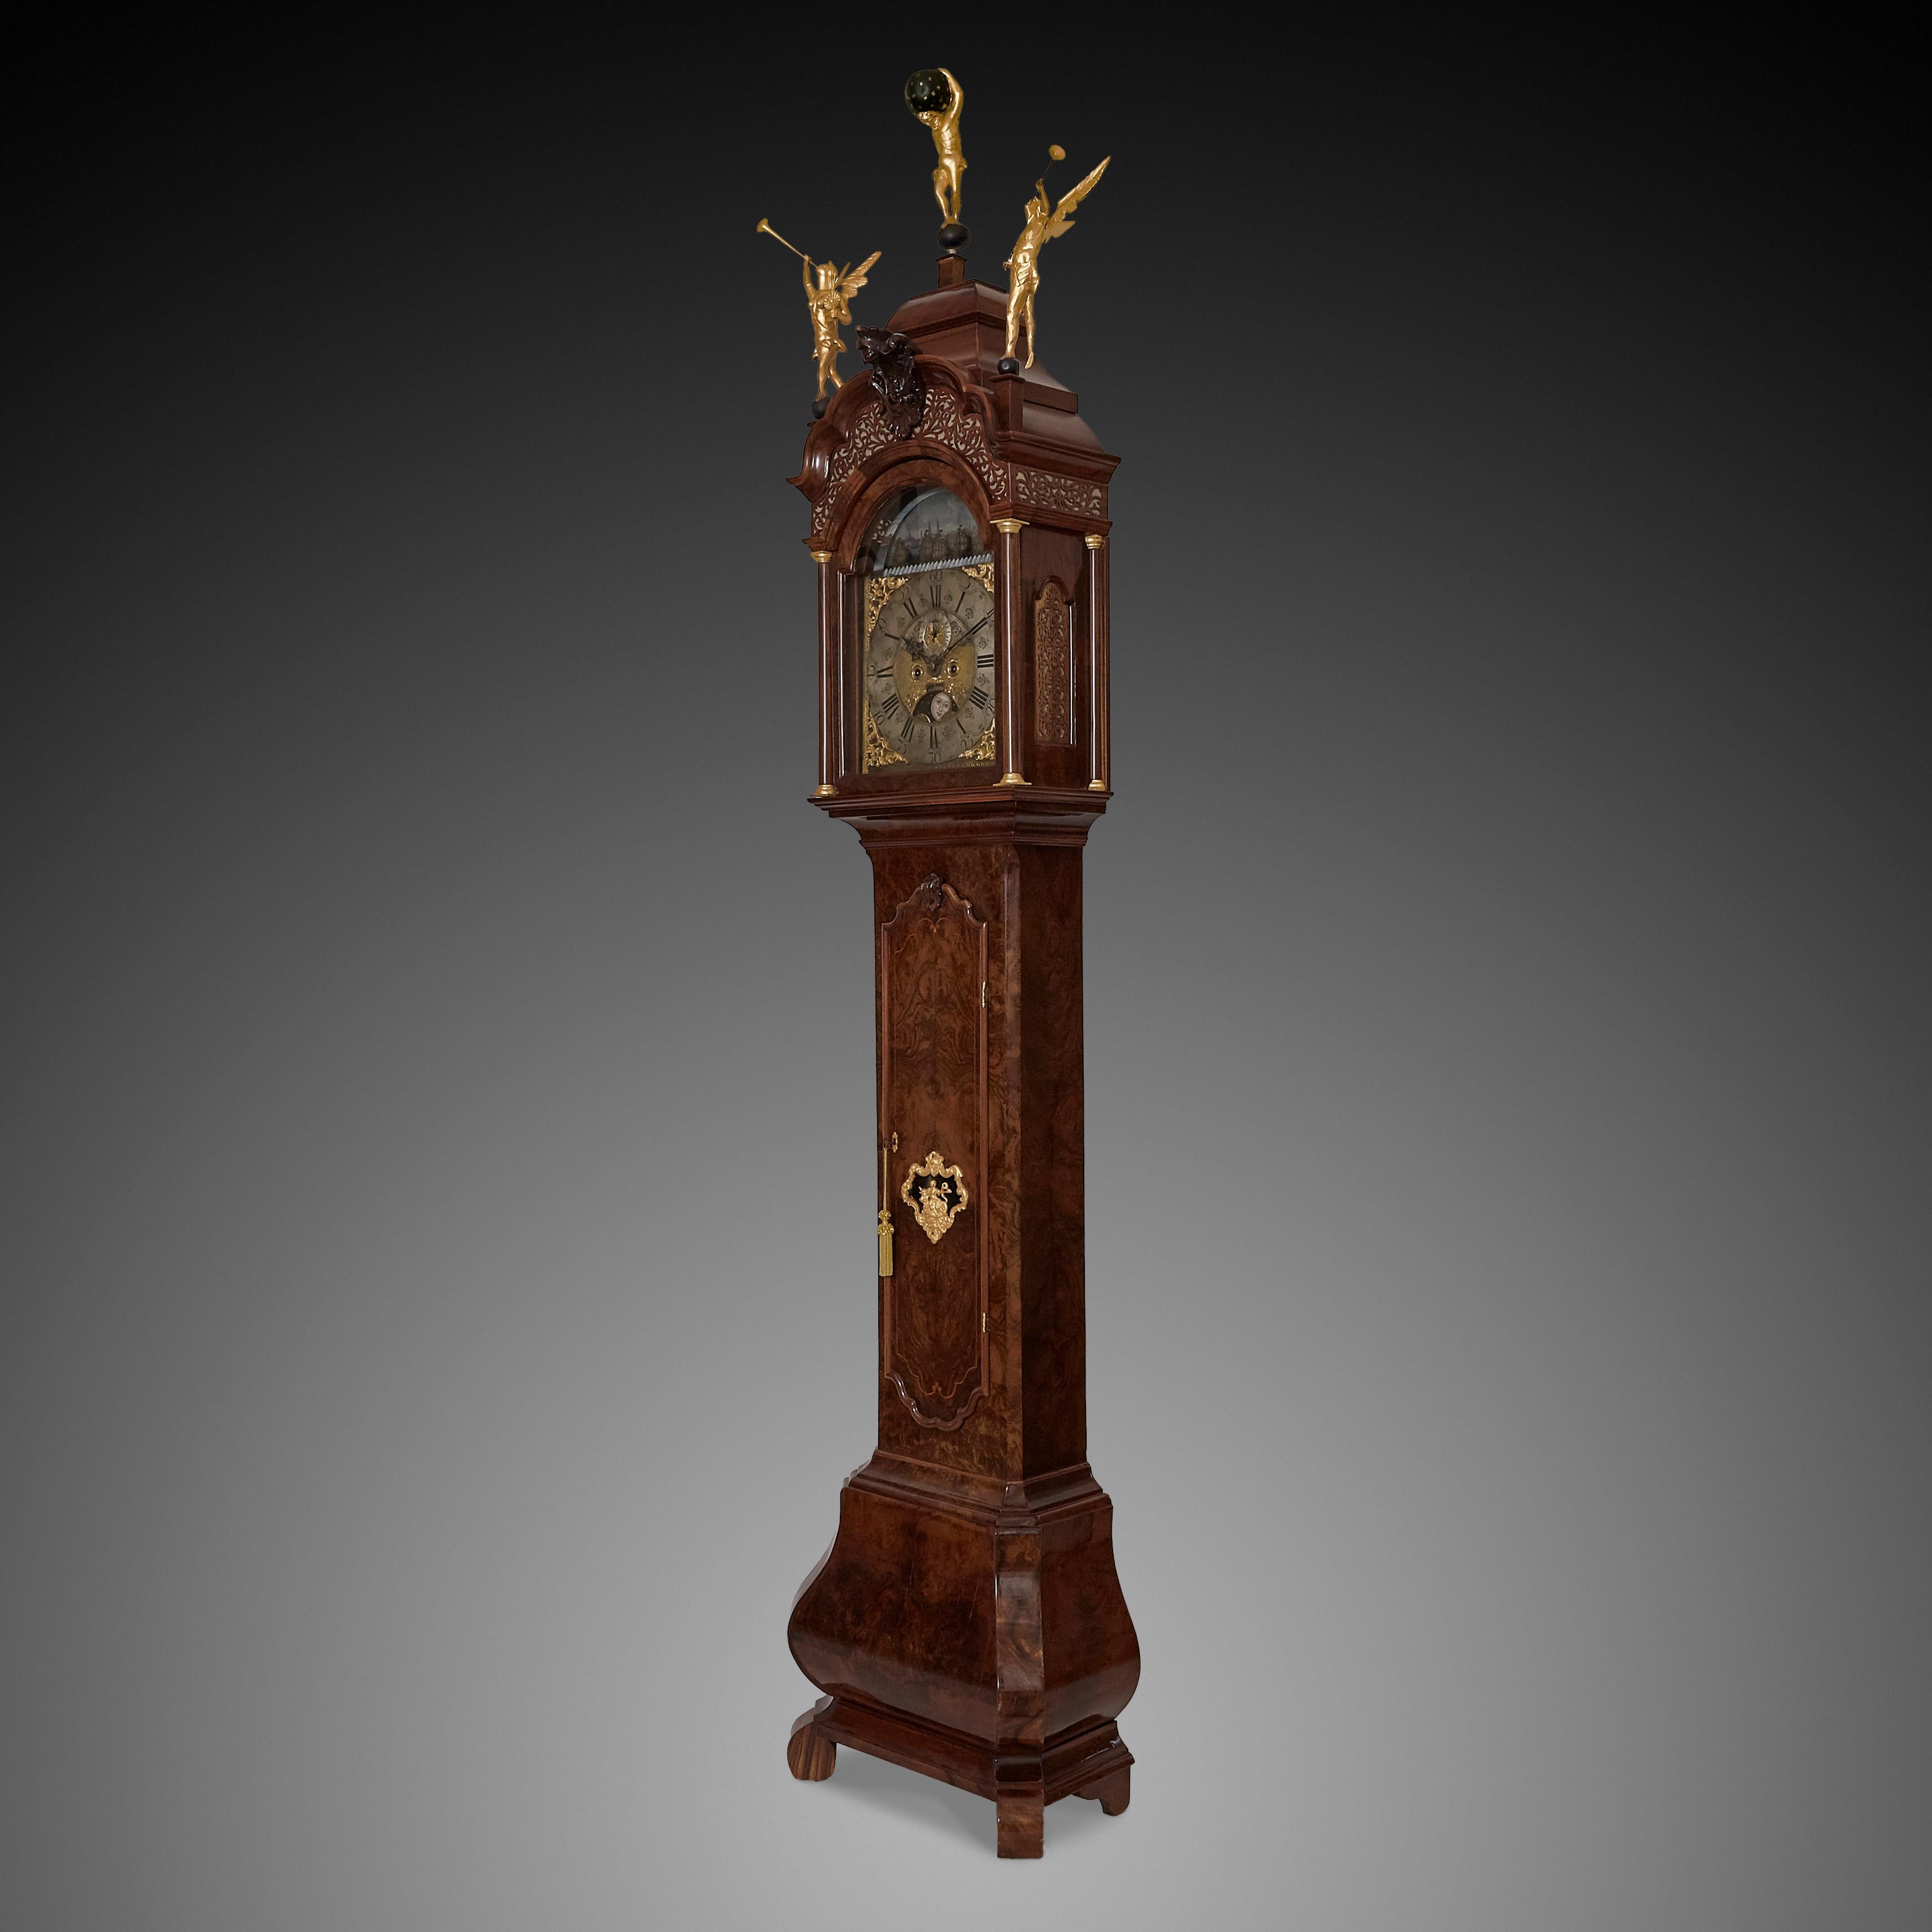 An impressive Dutch longcase clock with a burr walnut veneered oak case, signed on the chapter ring F. VAN CEULEN UTRECHT. The hood of this clock has a broken arch top pediment with very fine elaborate fretwork functioning as sound frets, as well as